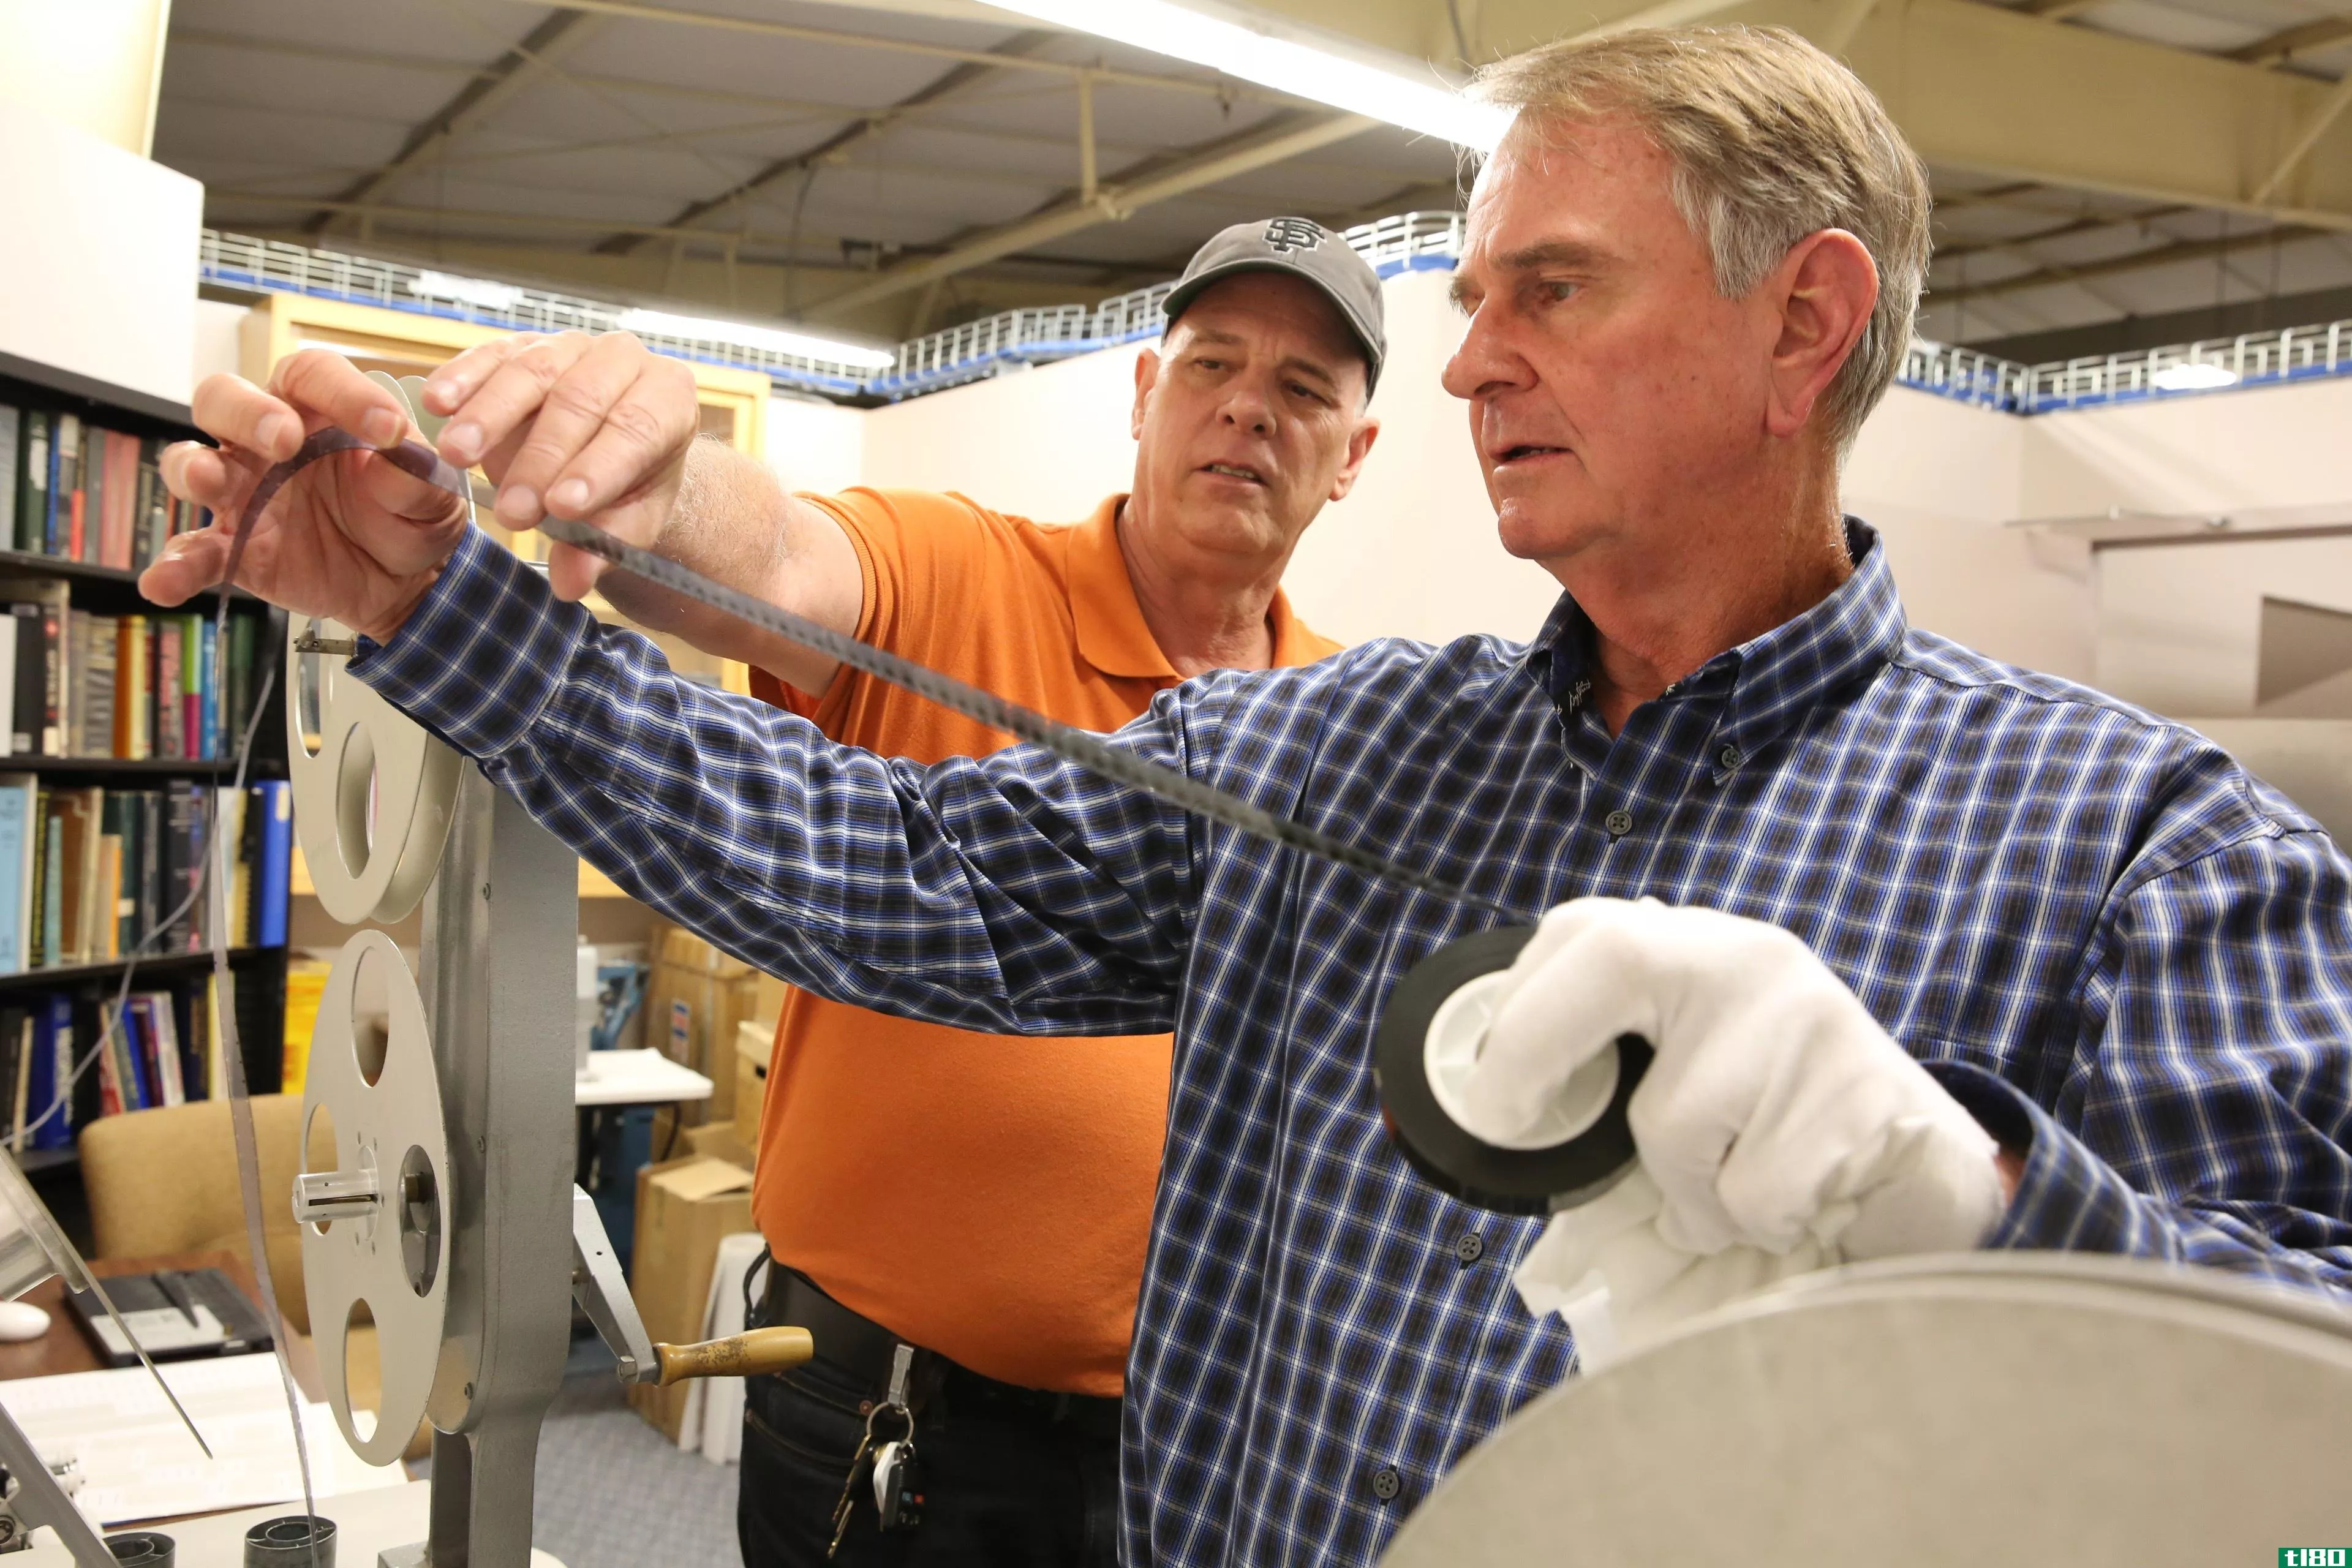 Jim Moye (left), a film preservation expert, and nuclear weap*** physicist Greg Spriggs (right) are working together to save thousands of nuclear test films.